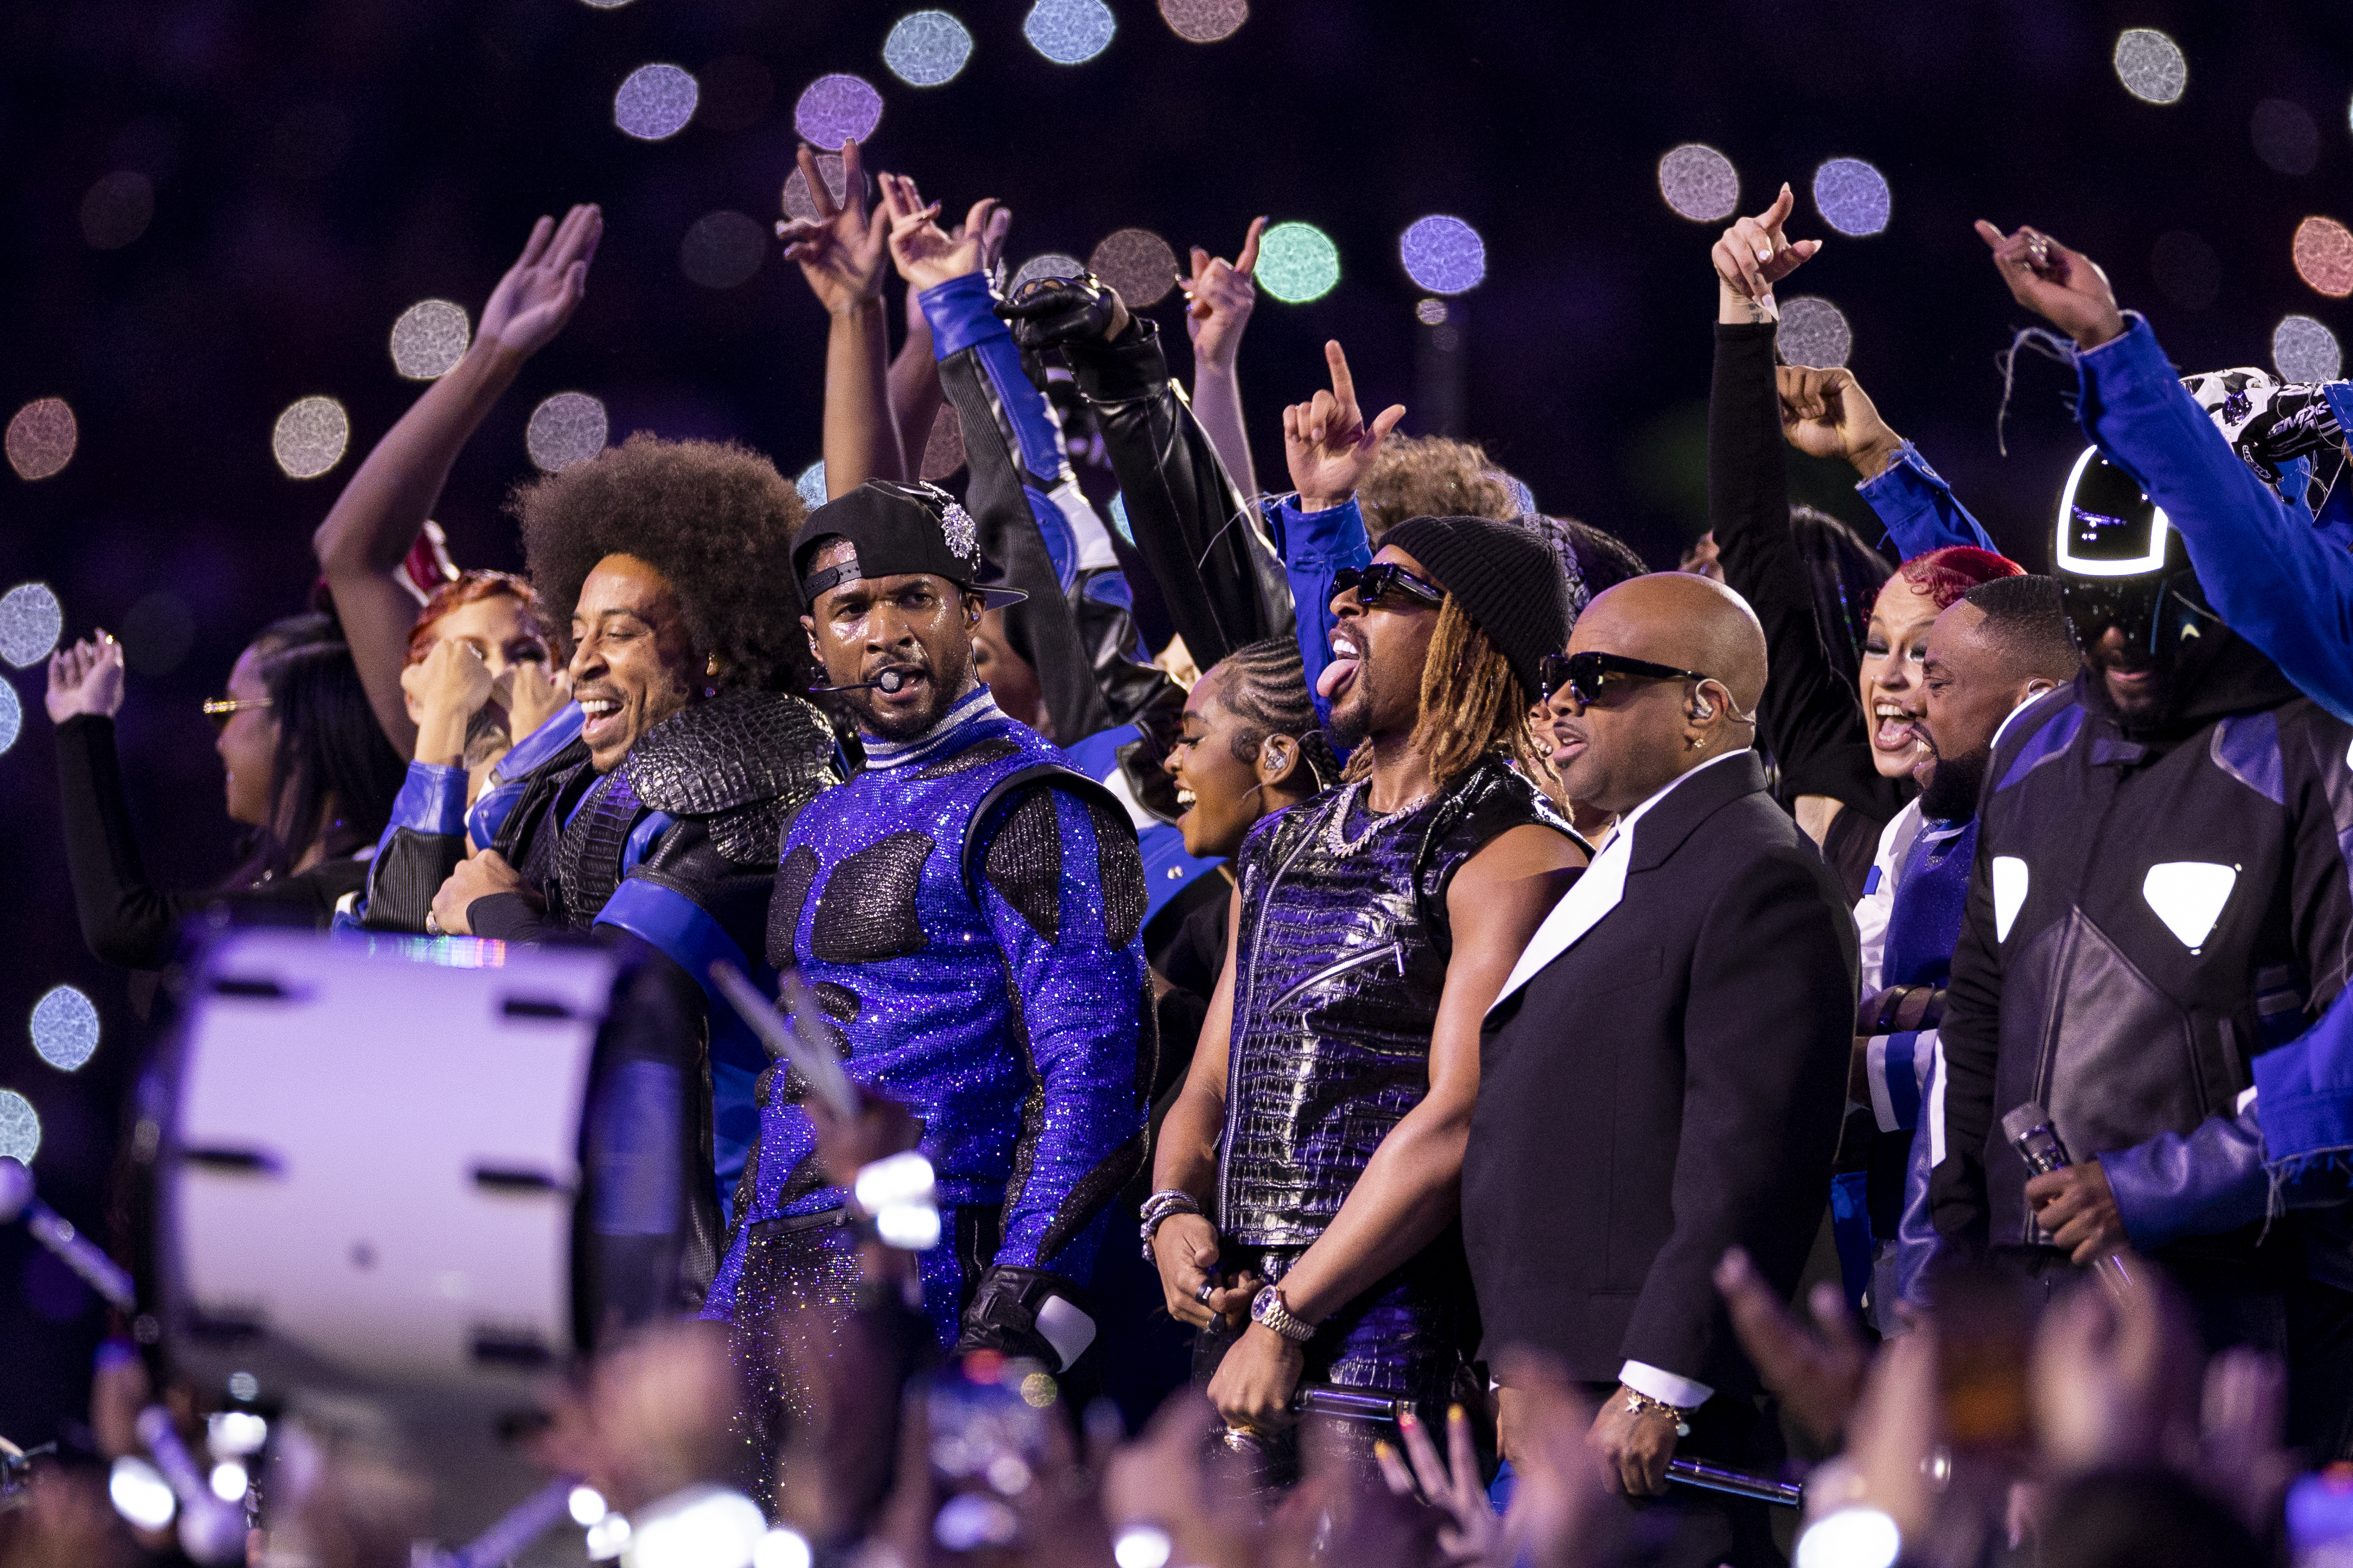 Usher and group of performers on stage with one in a sparkling blue outfit, celebrating under confetti